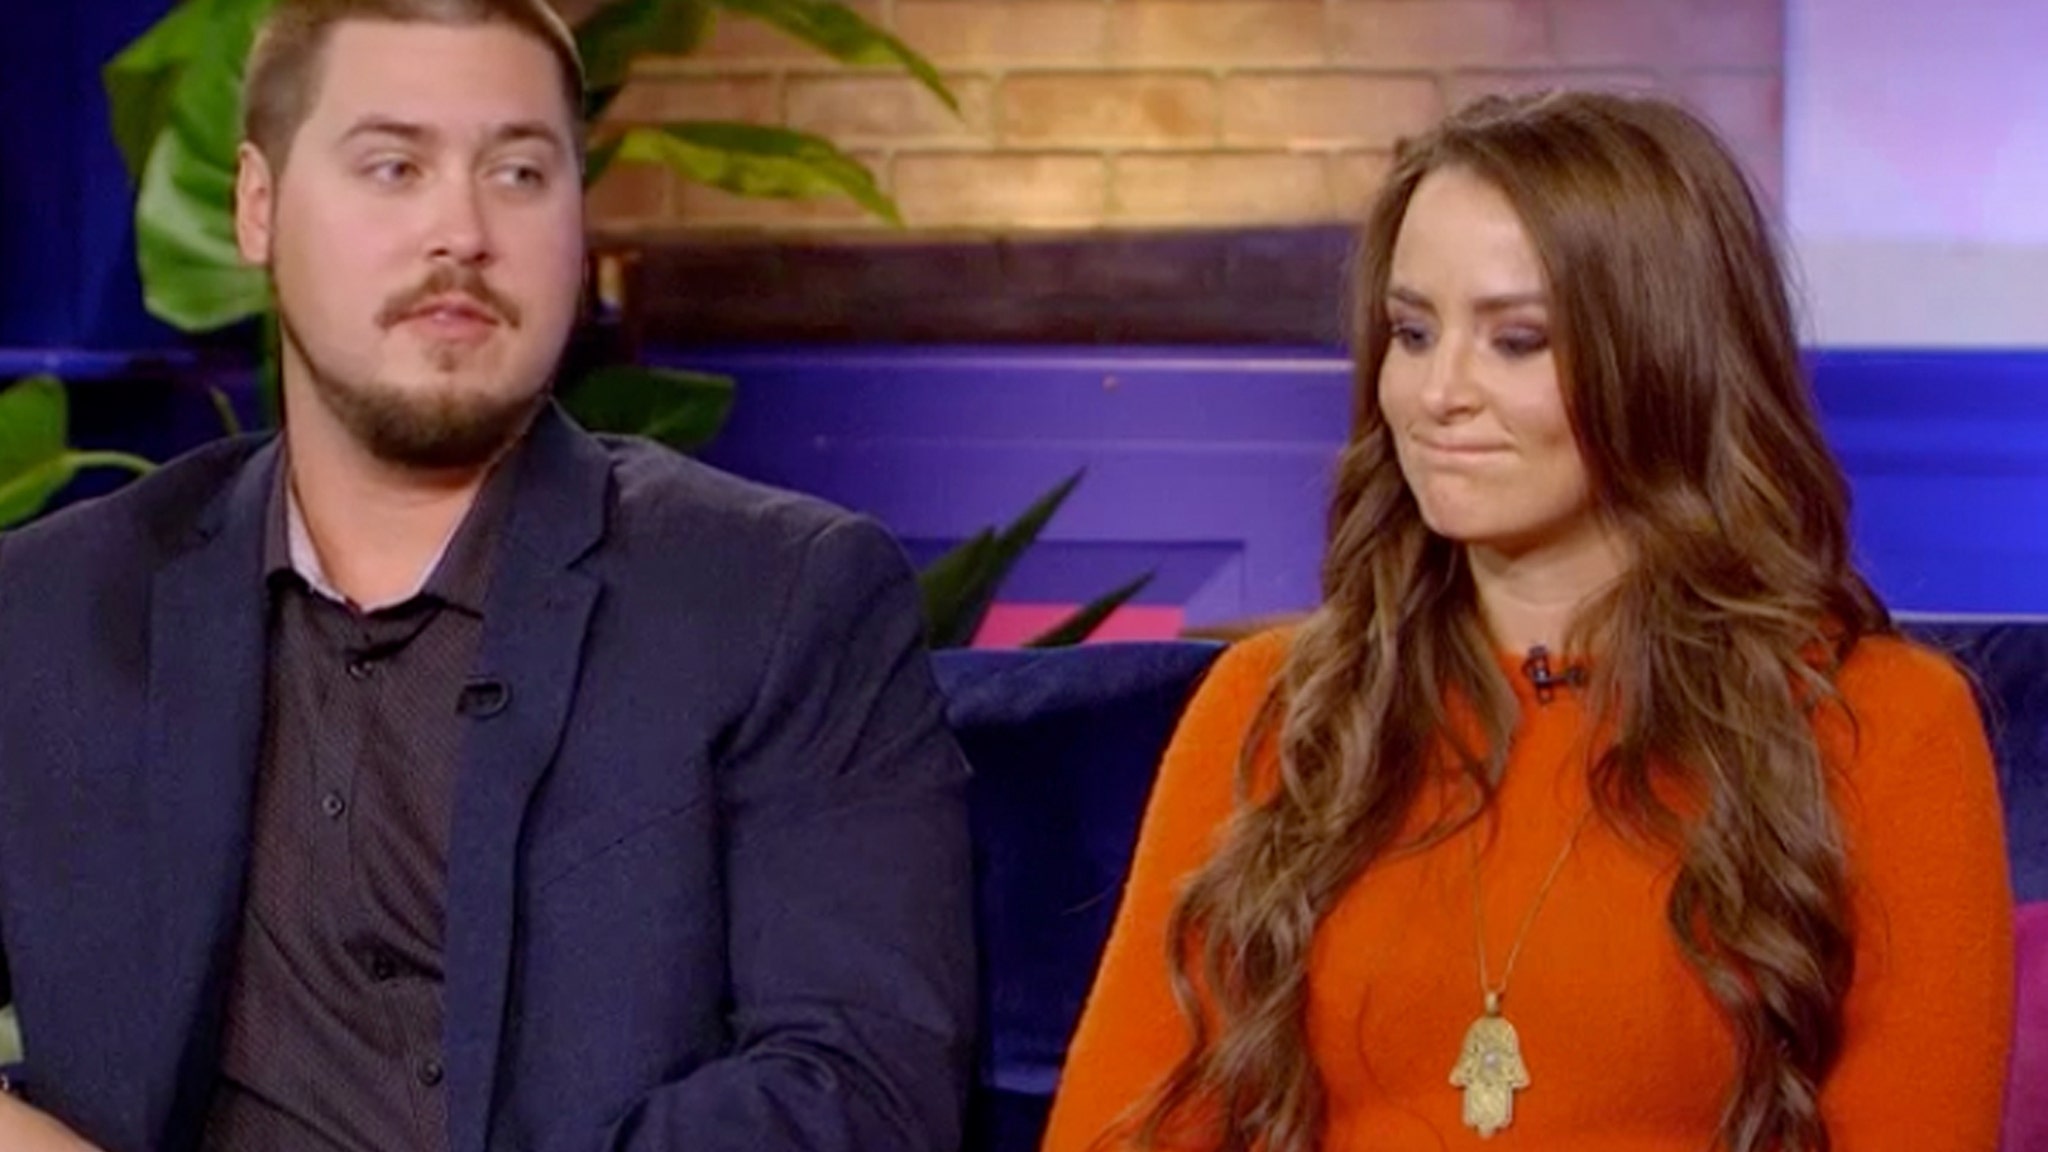 Teen Mom 2 Star Leah Messer And Jeremy Calvert Reveal Drama With Corey Simms